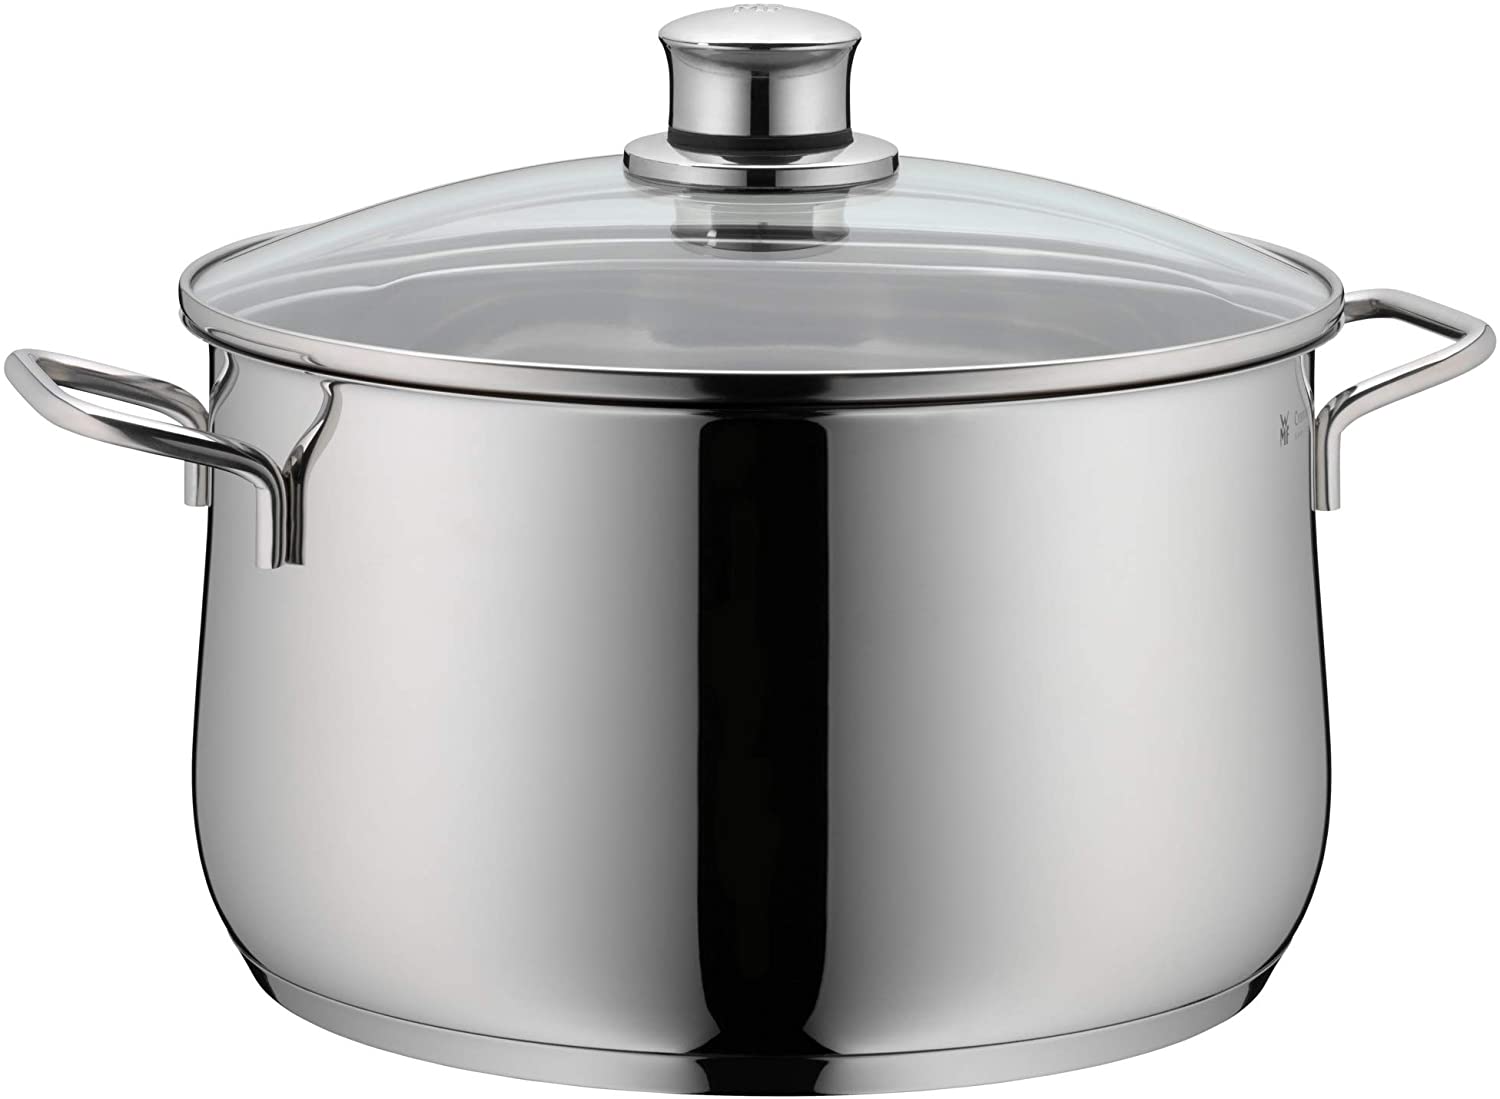 WMF Diadem Plus casserole induction high casserole 24cm high, induction pot 6.5l, glass lid, Cromargan stainless steel polished, uncoated